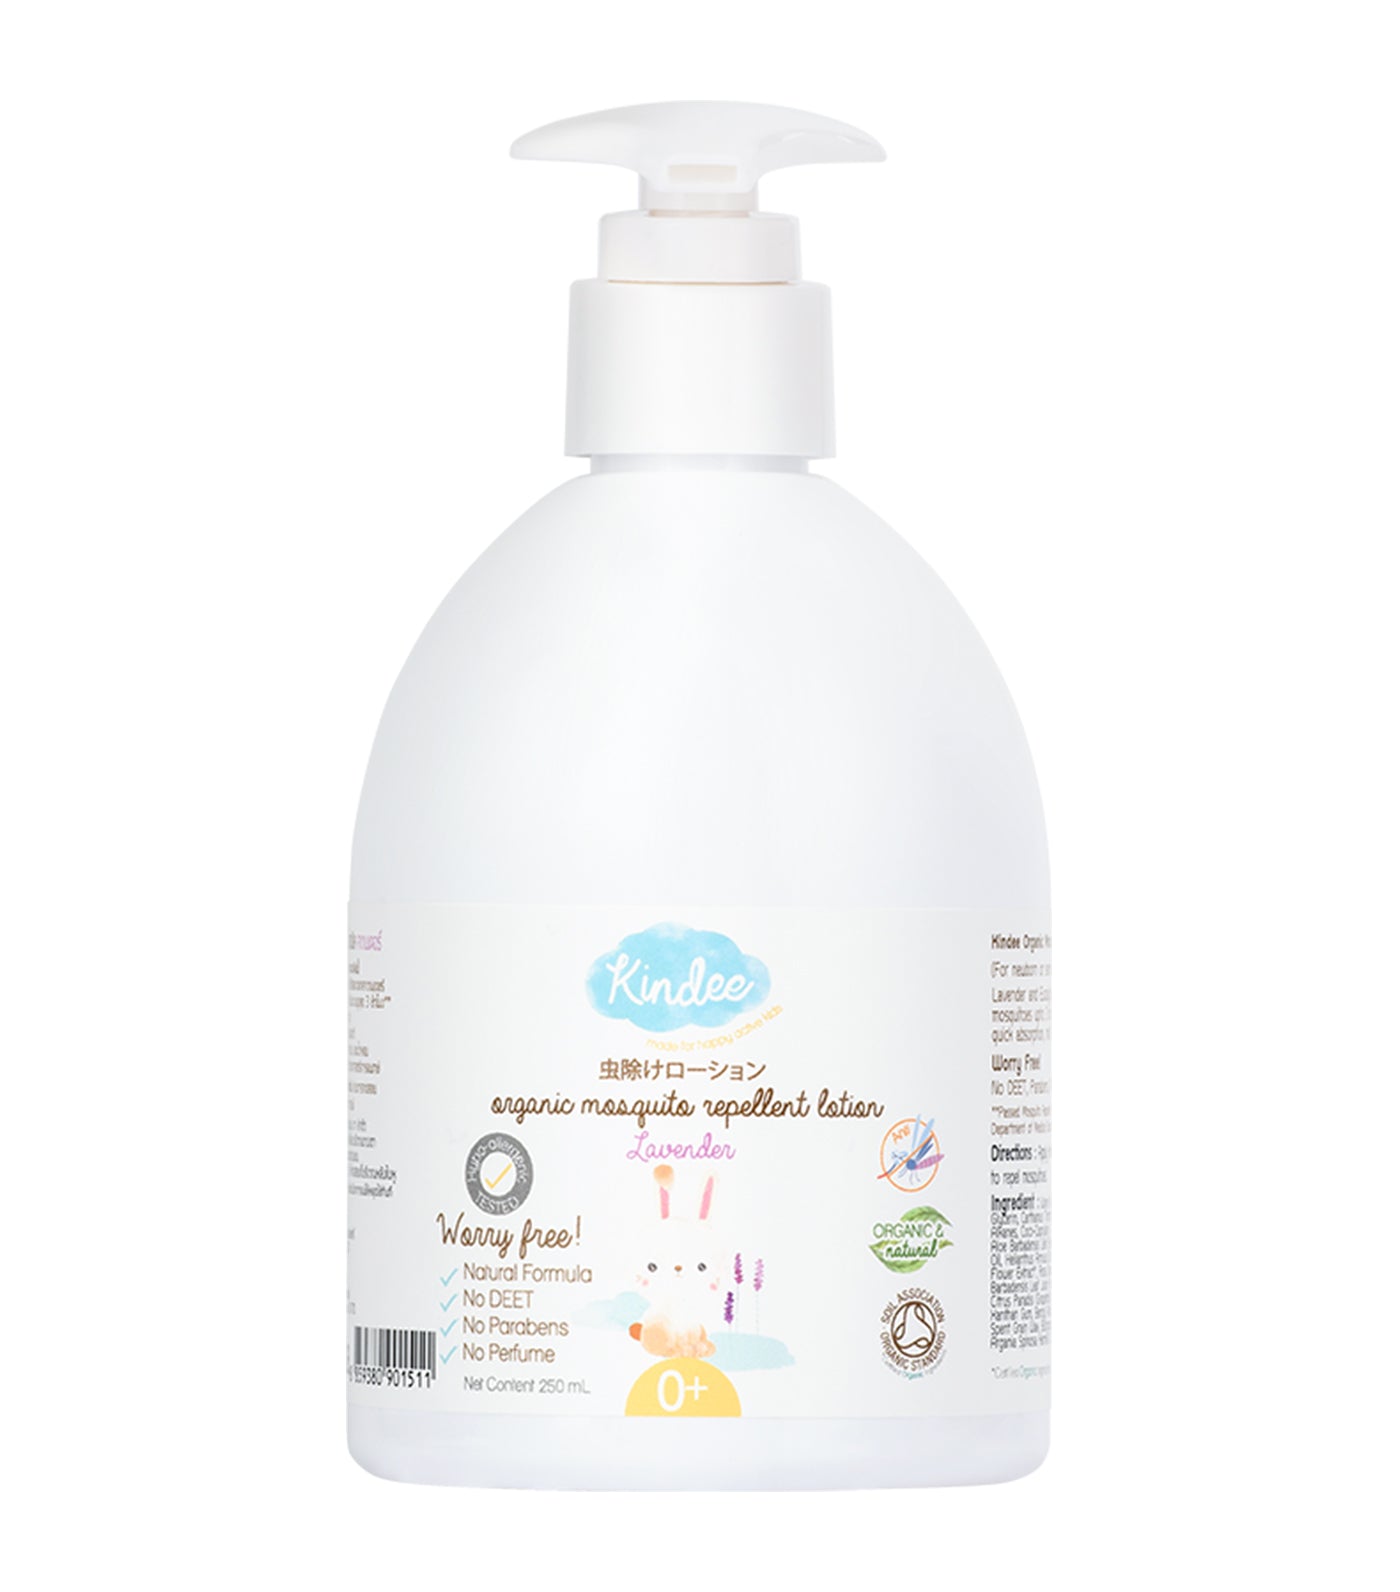 kindee 250ml organic mosquito repellent - lavender lotion